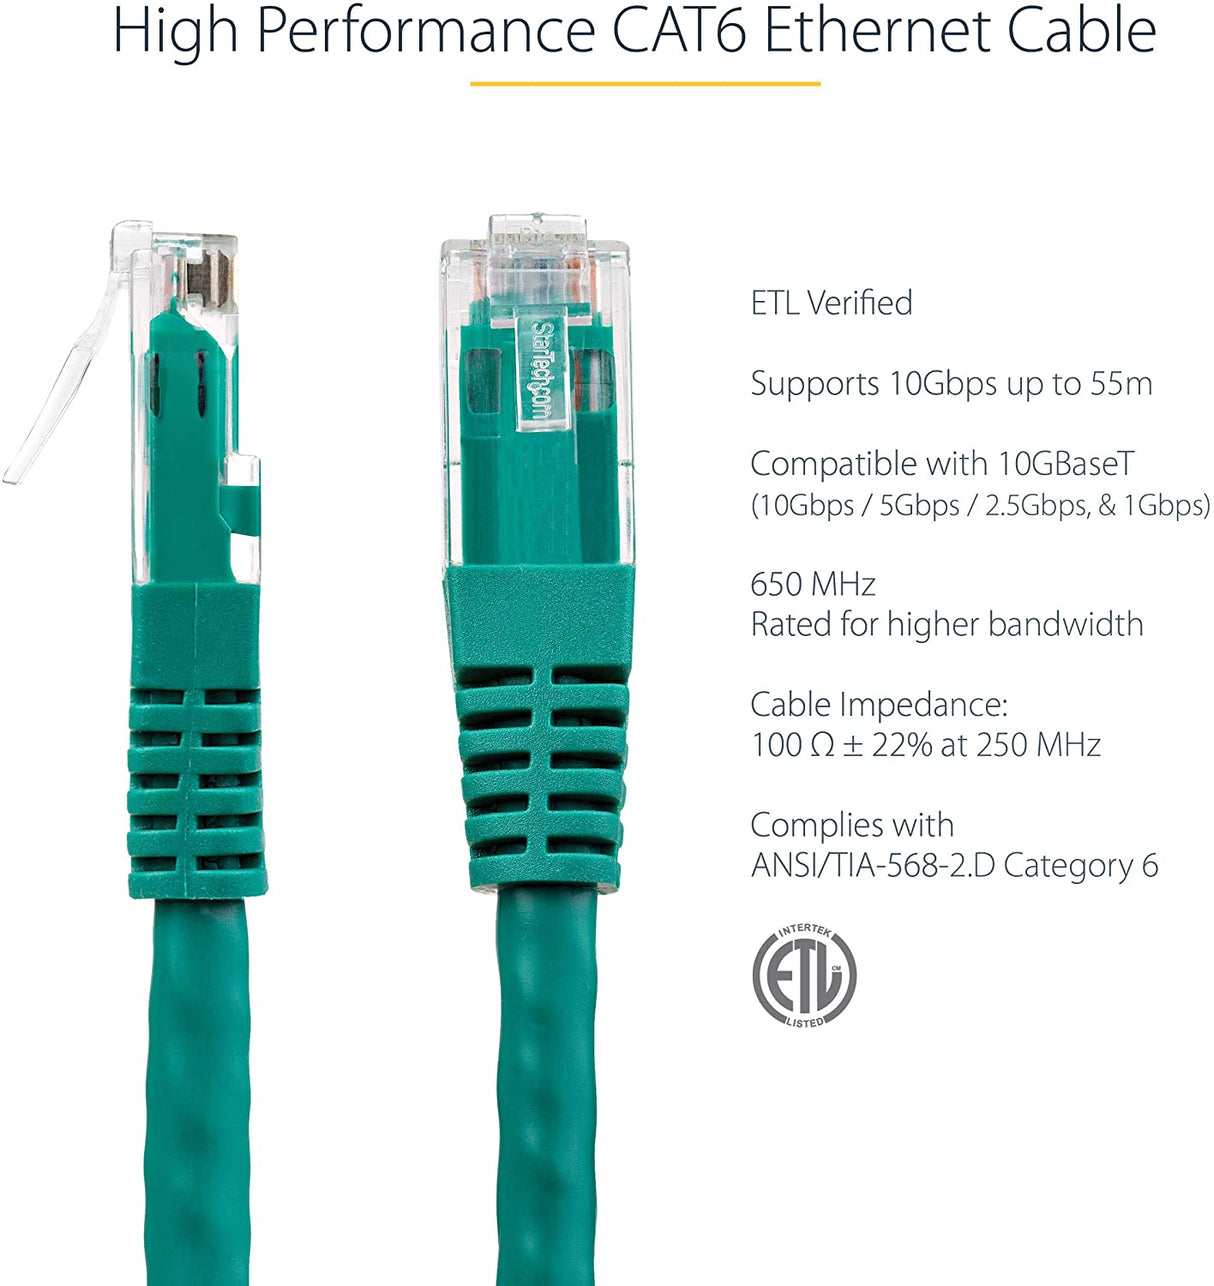 StarTech.com 12ft CAT6 Ethernet Cable - Green CAT 6 Gigabit Ethernet Wire -650MHz 100W PoE++ RJ45 UTP Molded Category 6 Network/Patch Cord w/Strain Relief/Fluke Tested UL/TIA Certified (C6PATCH12GN) Green 12 ft / 3.6 m 1 Pack